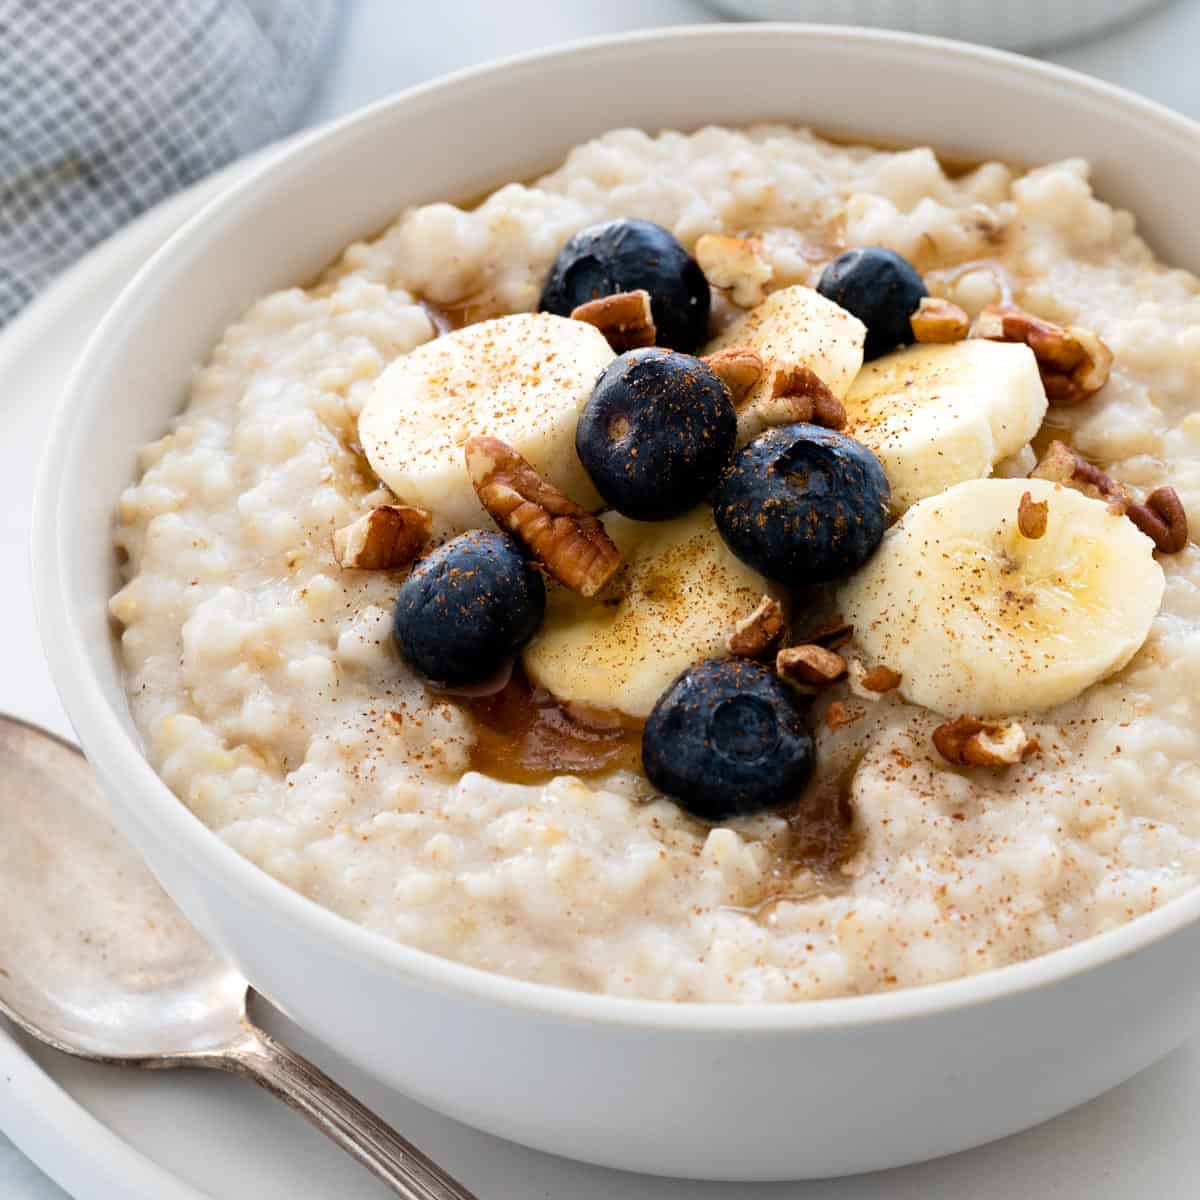 how to cook quaker steel cut oats in microwave - Microwave Recipes